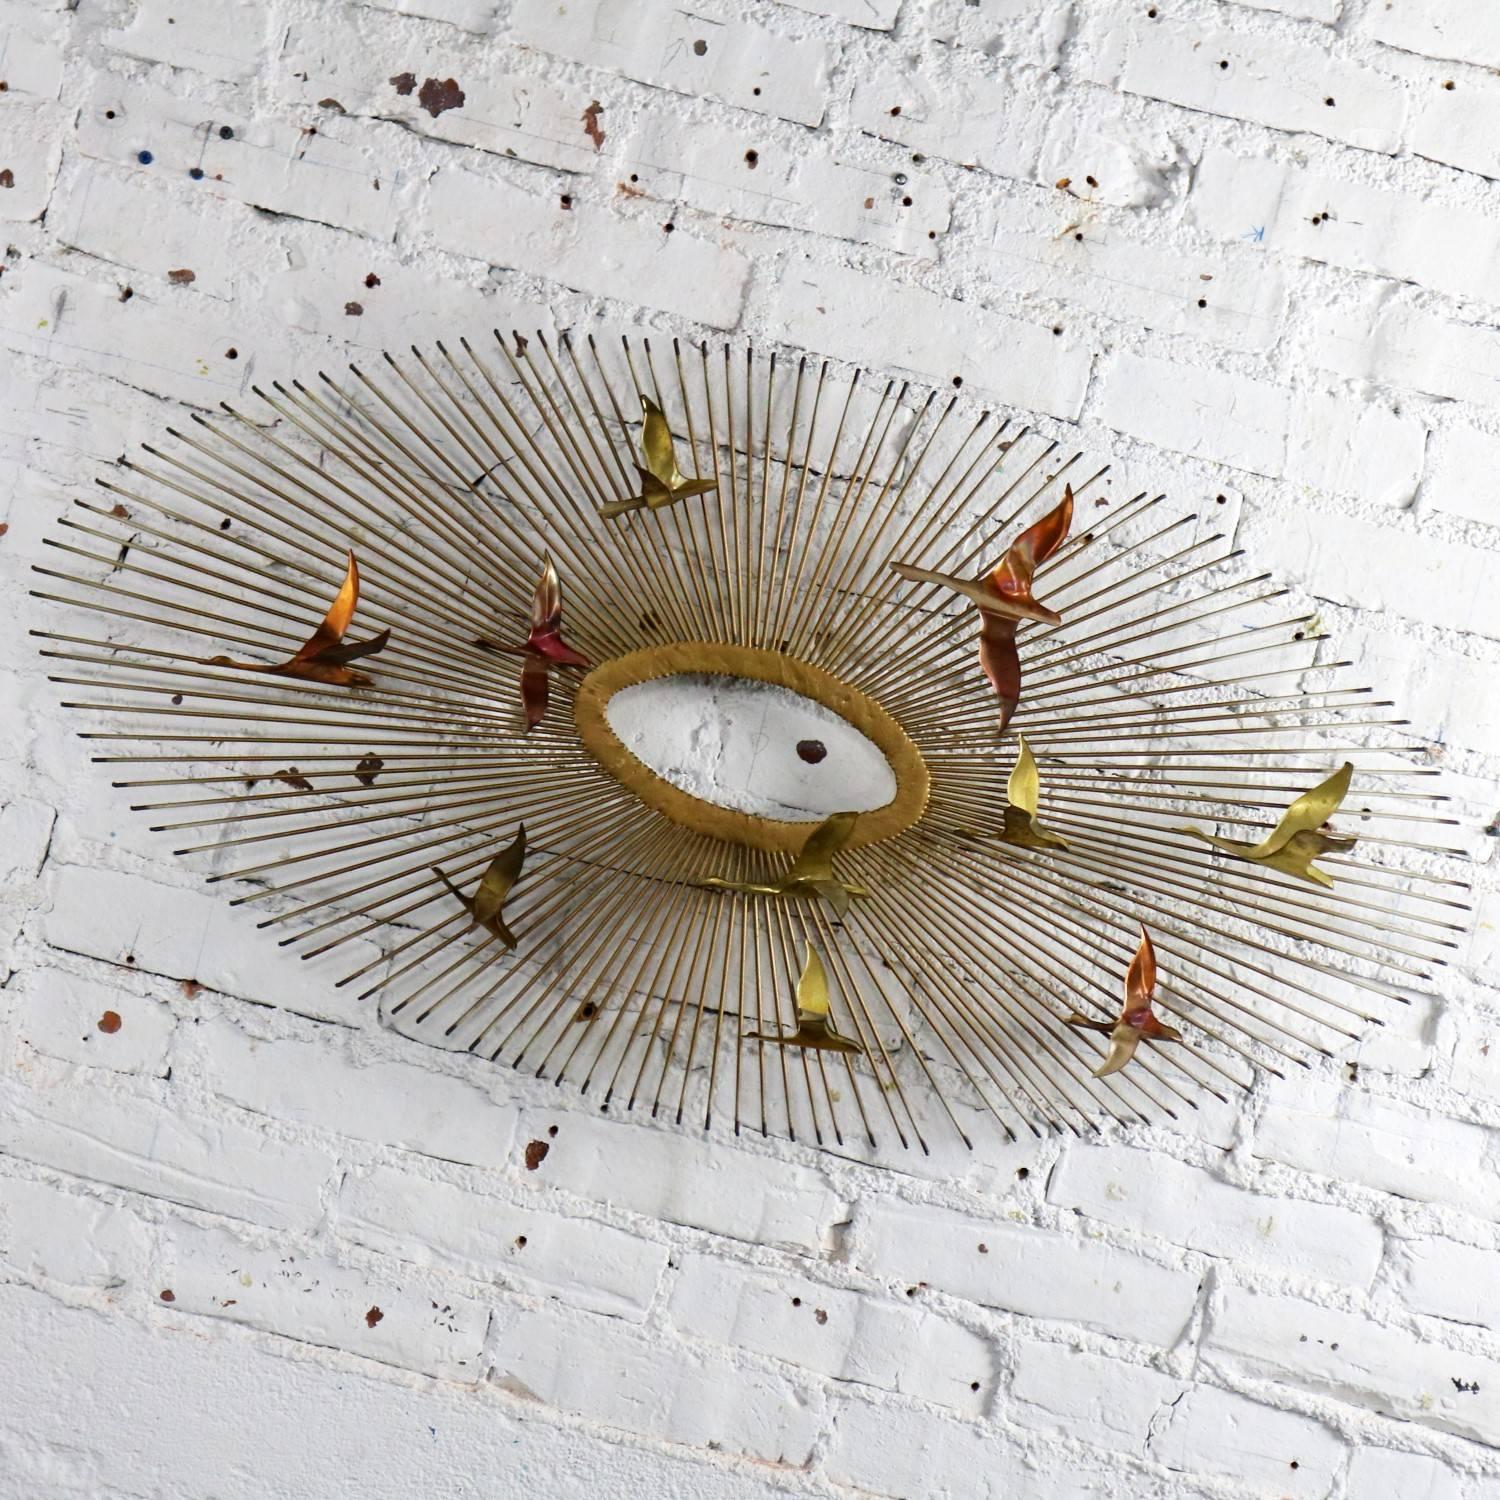 Handsome steel, copper and brass Mid-Century Modern wall sculpture depicting an oval sunburst with birds attributed to C. Jere; however, this one is unsigned. In wonderful vintage condition with no outstanding flaws, circa 1960s-1980s.

Not a